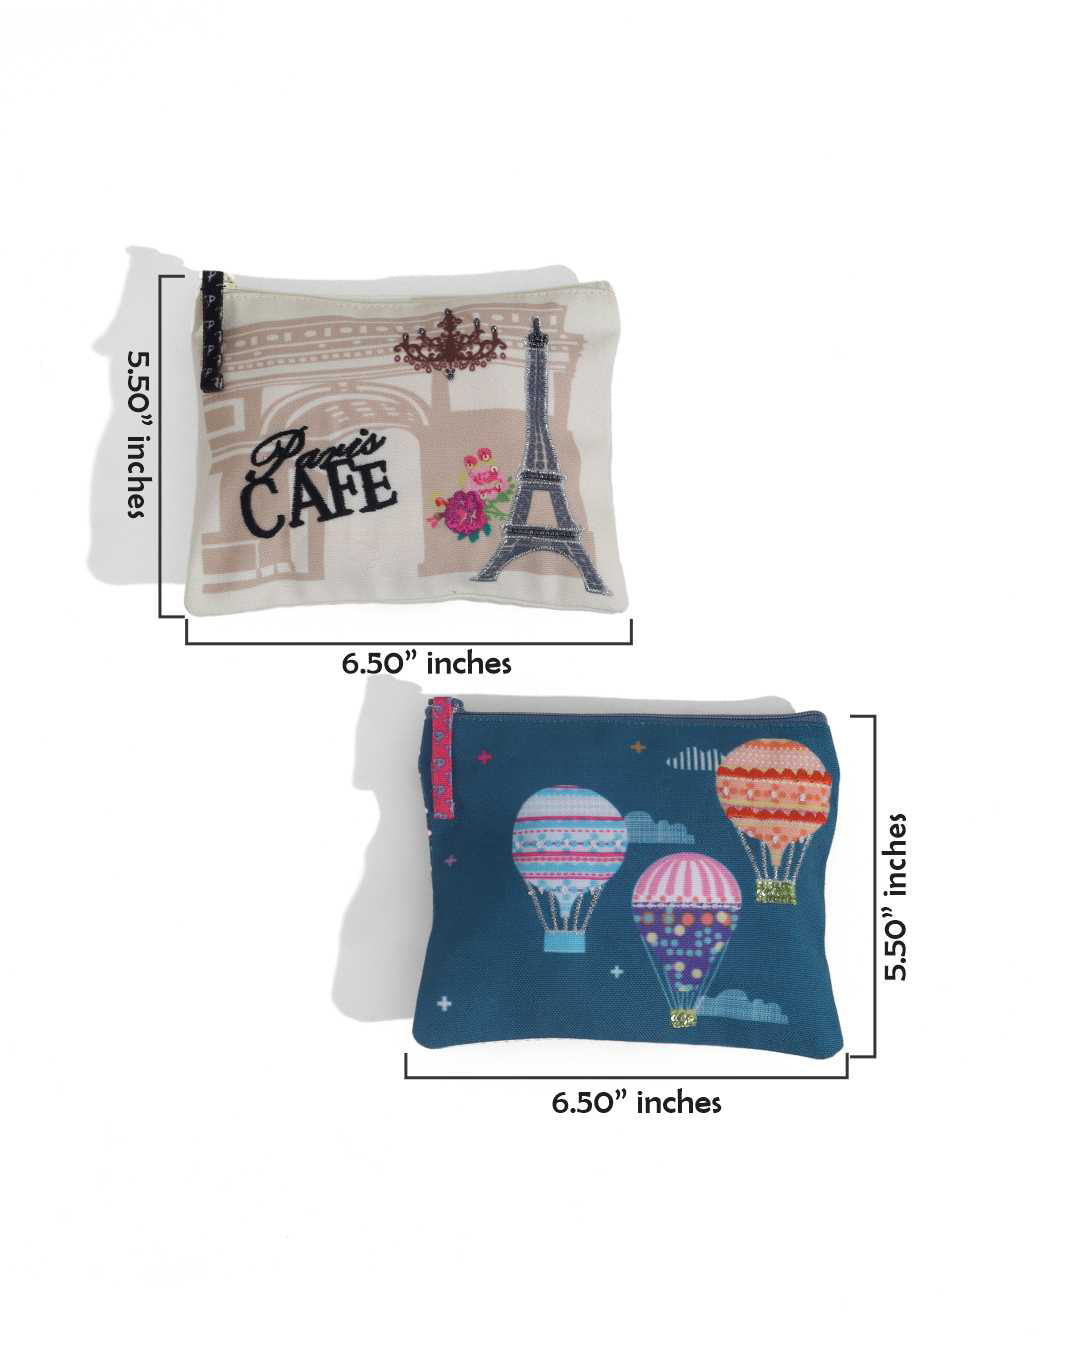 Paris Cafe, High On hapiness Coin Pouch Set of 2